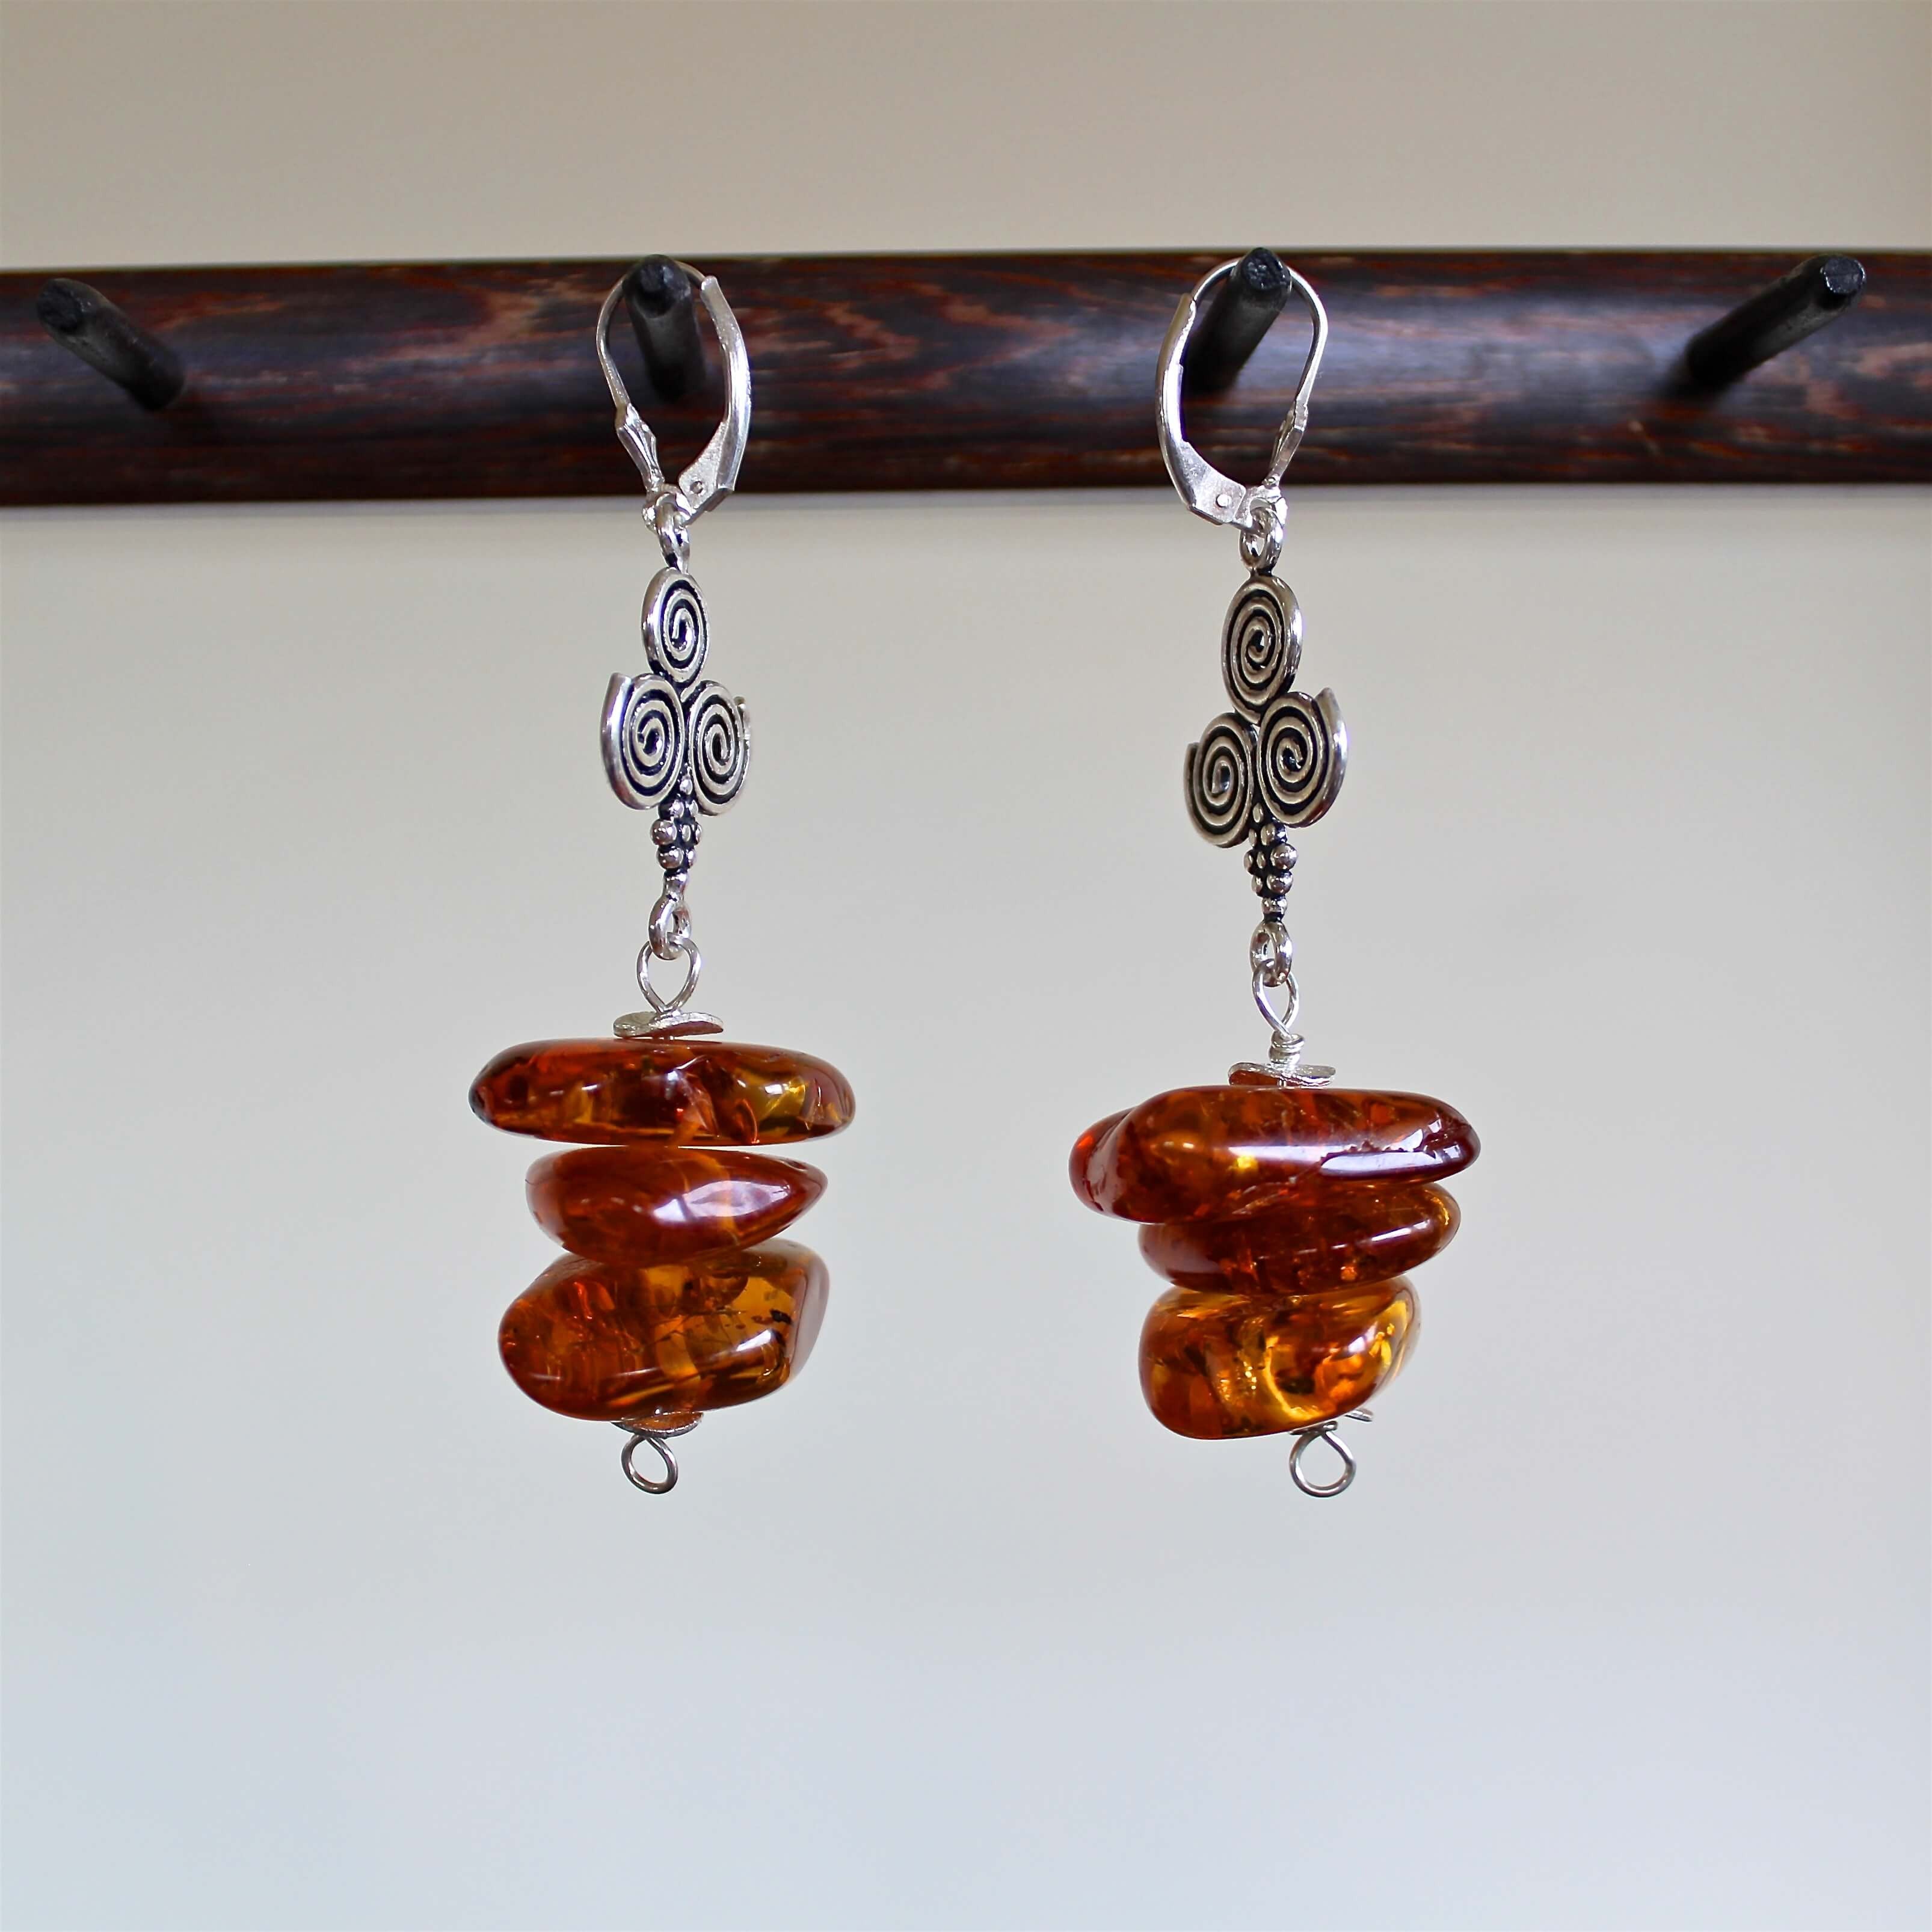 An eye level shot of the Cognac Baltic Amber and Sterling Silver Spiral Bead Earrings hanging in front of a white background showing off the various rich, reddish brown tones of these stacked, intentionally mismatched, one of a kind oblong shaped amber beads, along with the detail of the sterling silver spiral beads.